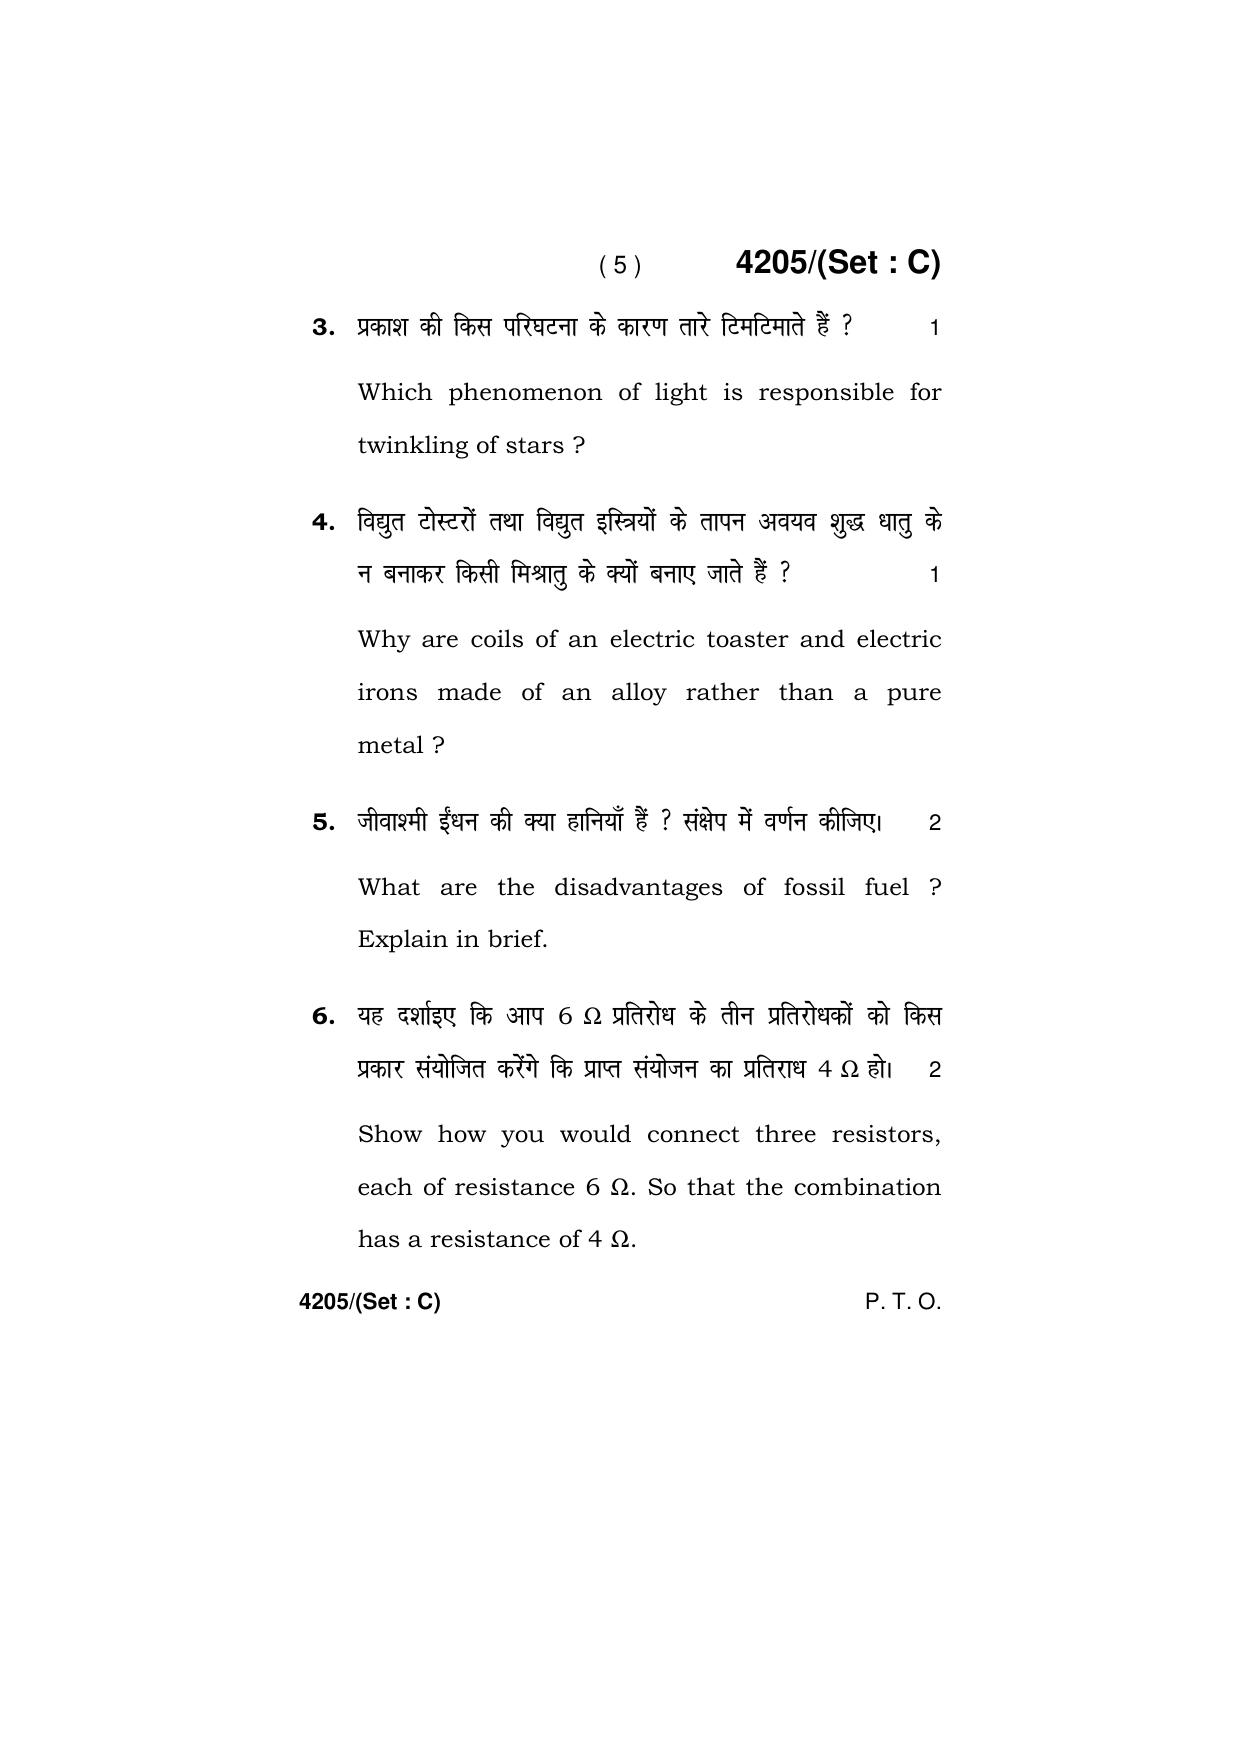 Haryana Board HBSE Class 10 Science (All Set) 2019 Question Paper - Page 37